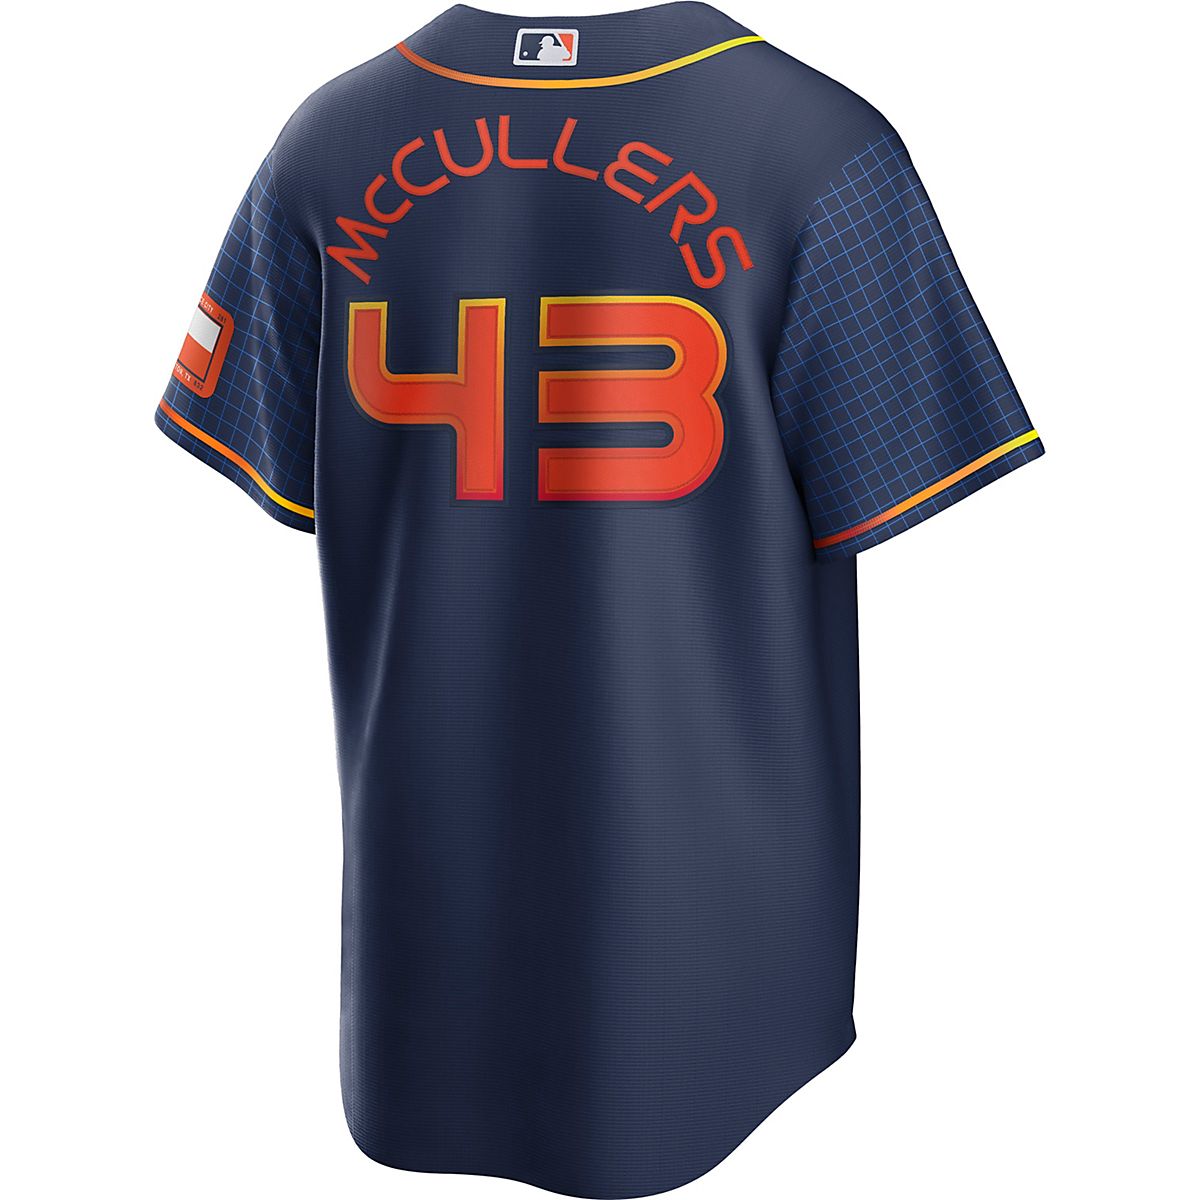 Nike Men's Houston Astros Gold Lance McCullers Replica Jersey